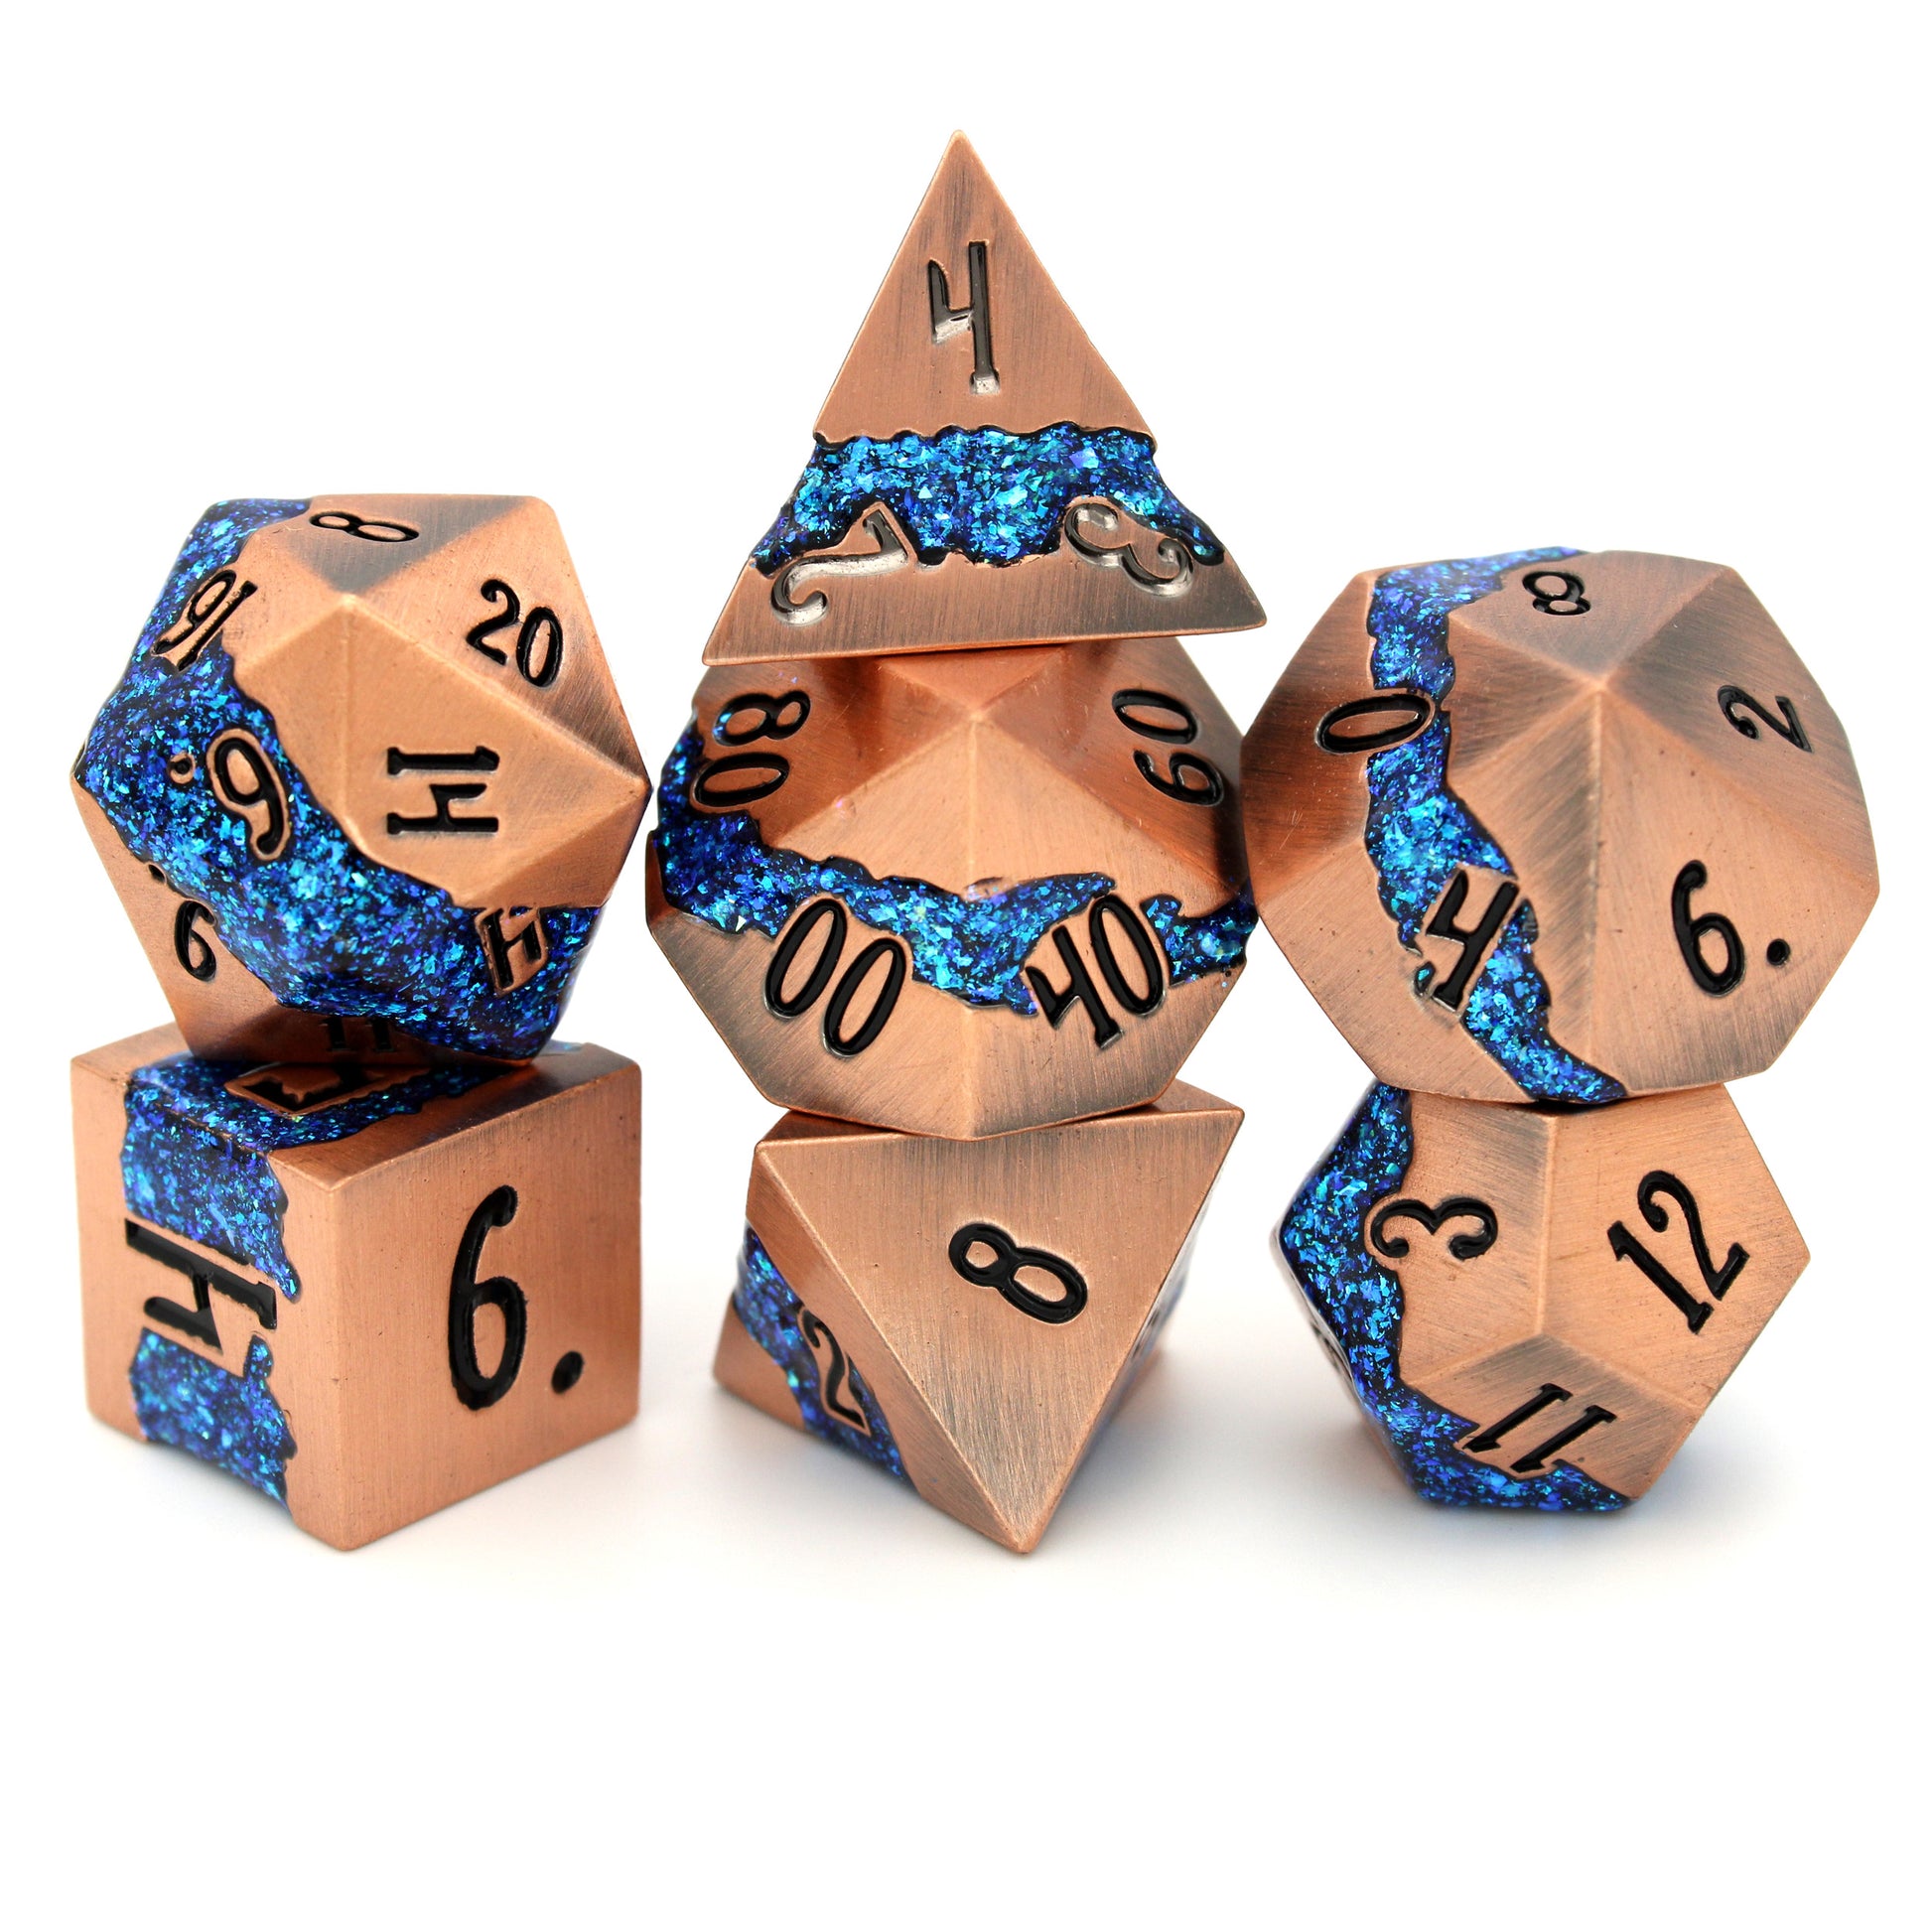 Rolling River is a 7-piece metal dice set with a rich copper frame and brilliantly glittering teal-blue enamel.